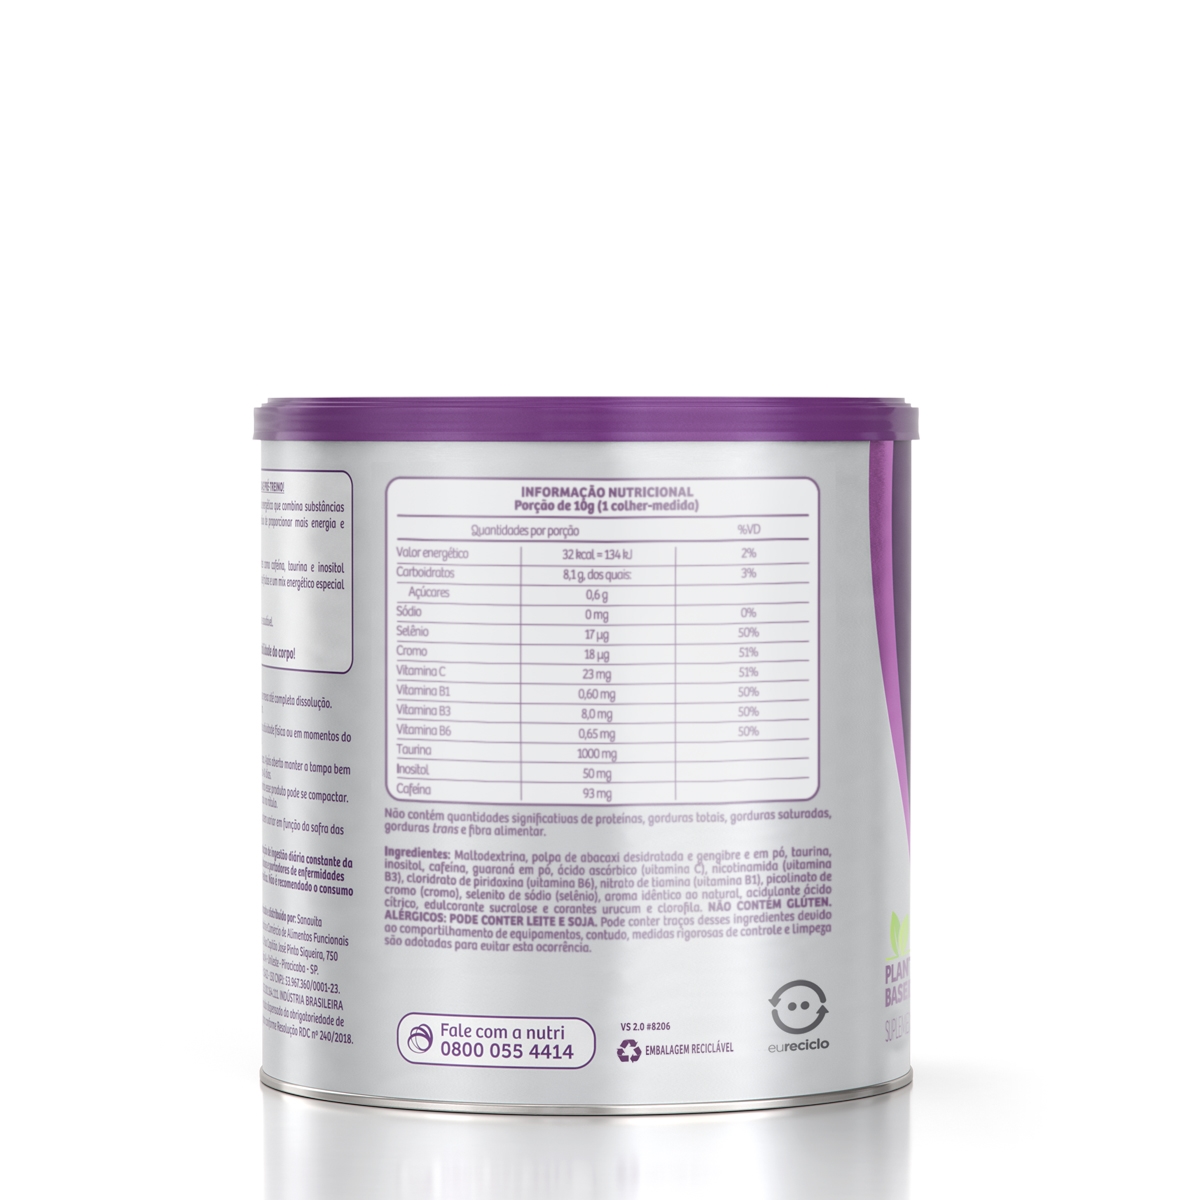 Thermo Energy - Abacaxi com Hortelã - 300g